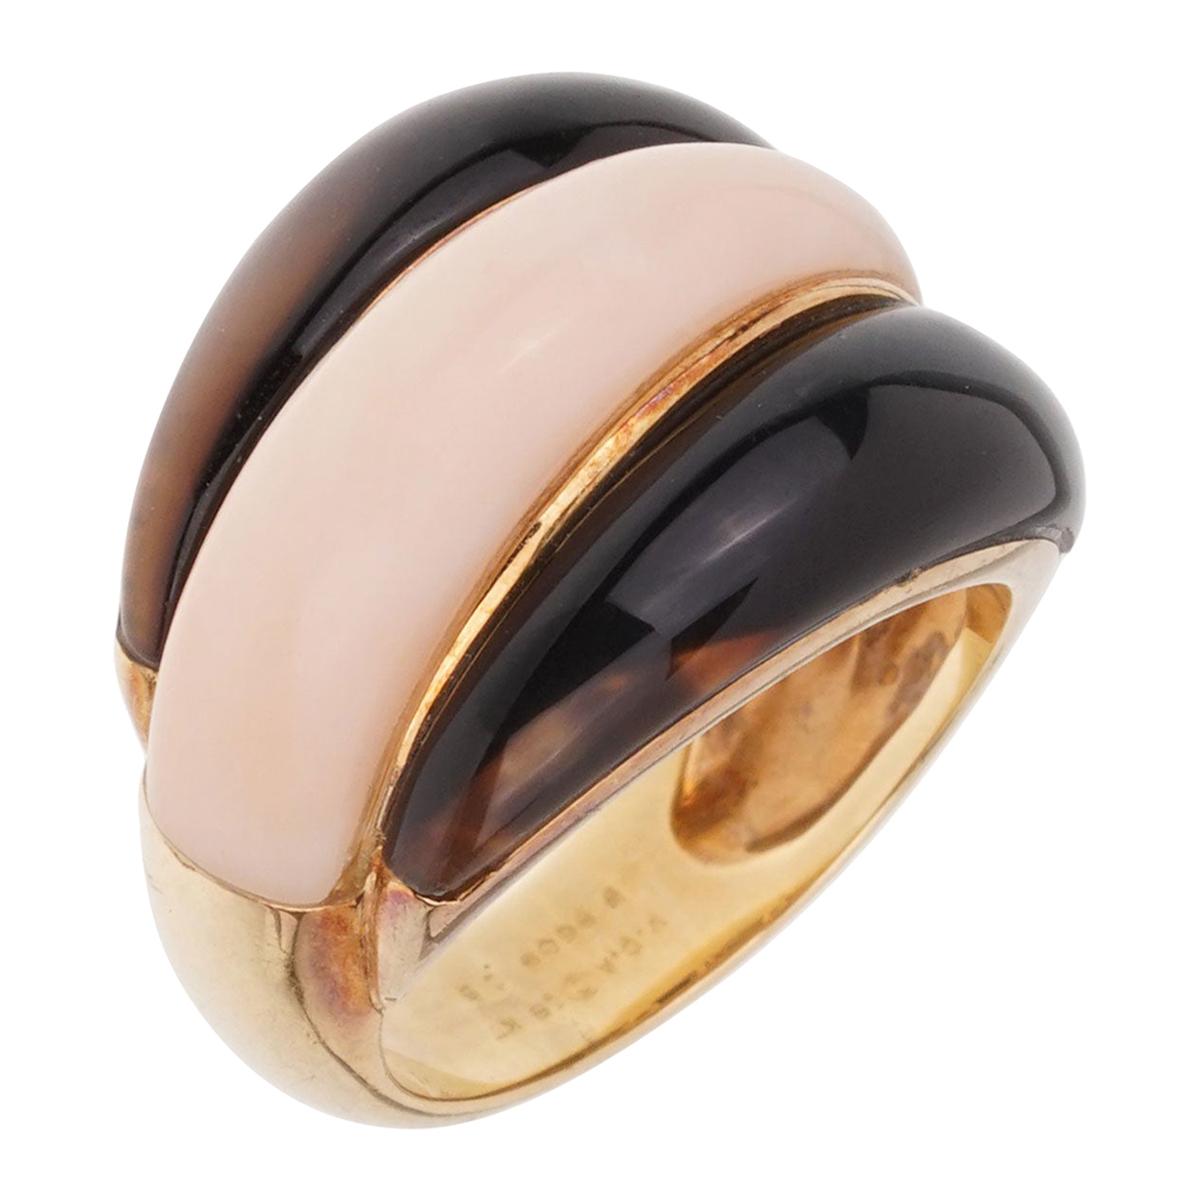 Van Cleef & Arpels Angel Skin Coral Bombe Yellow Gold Ring